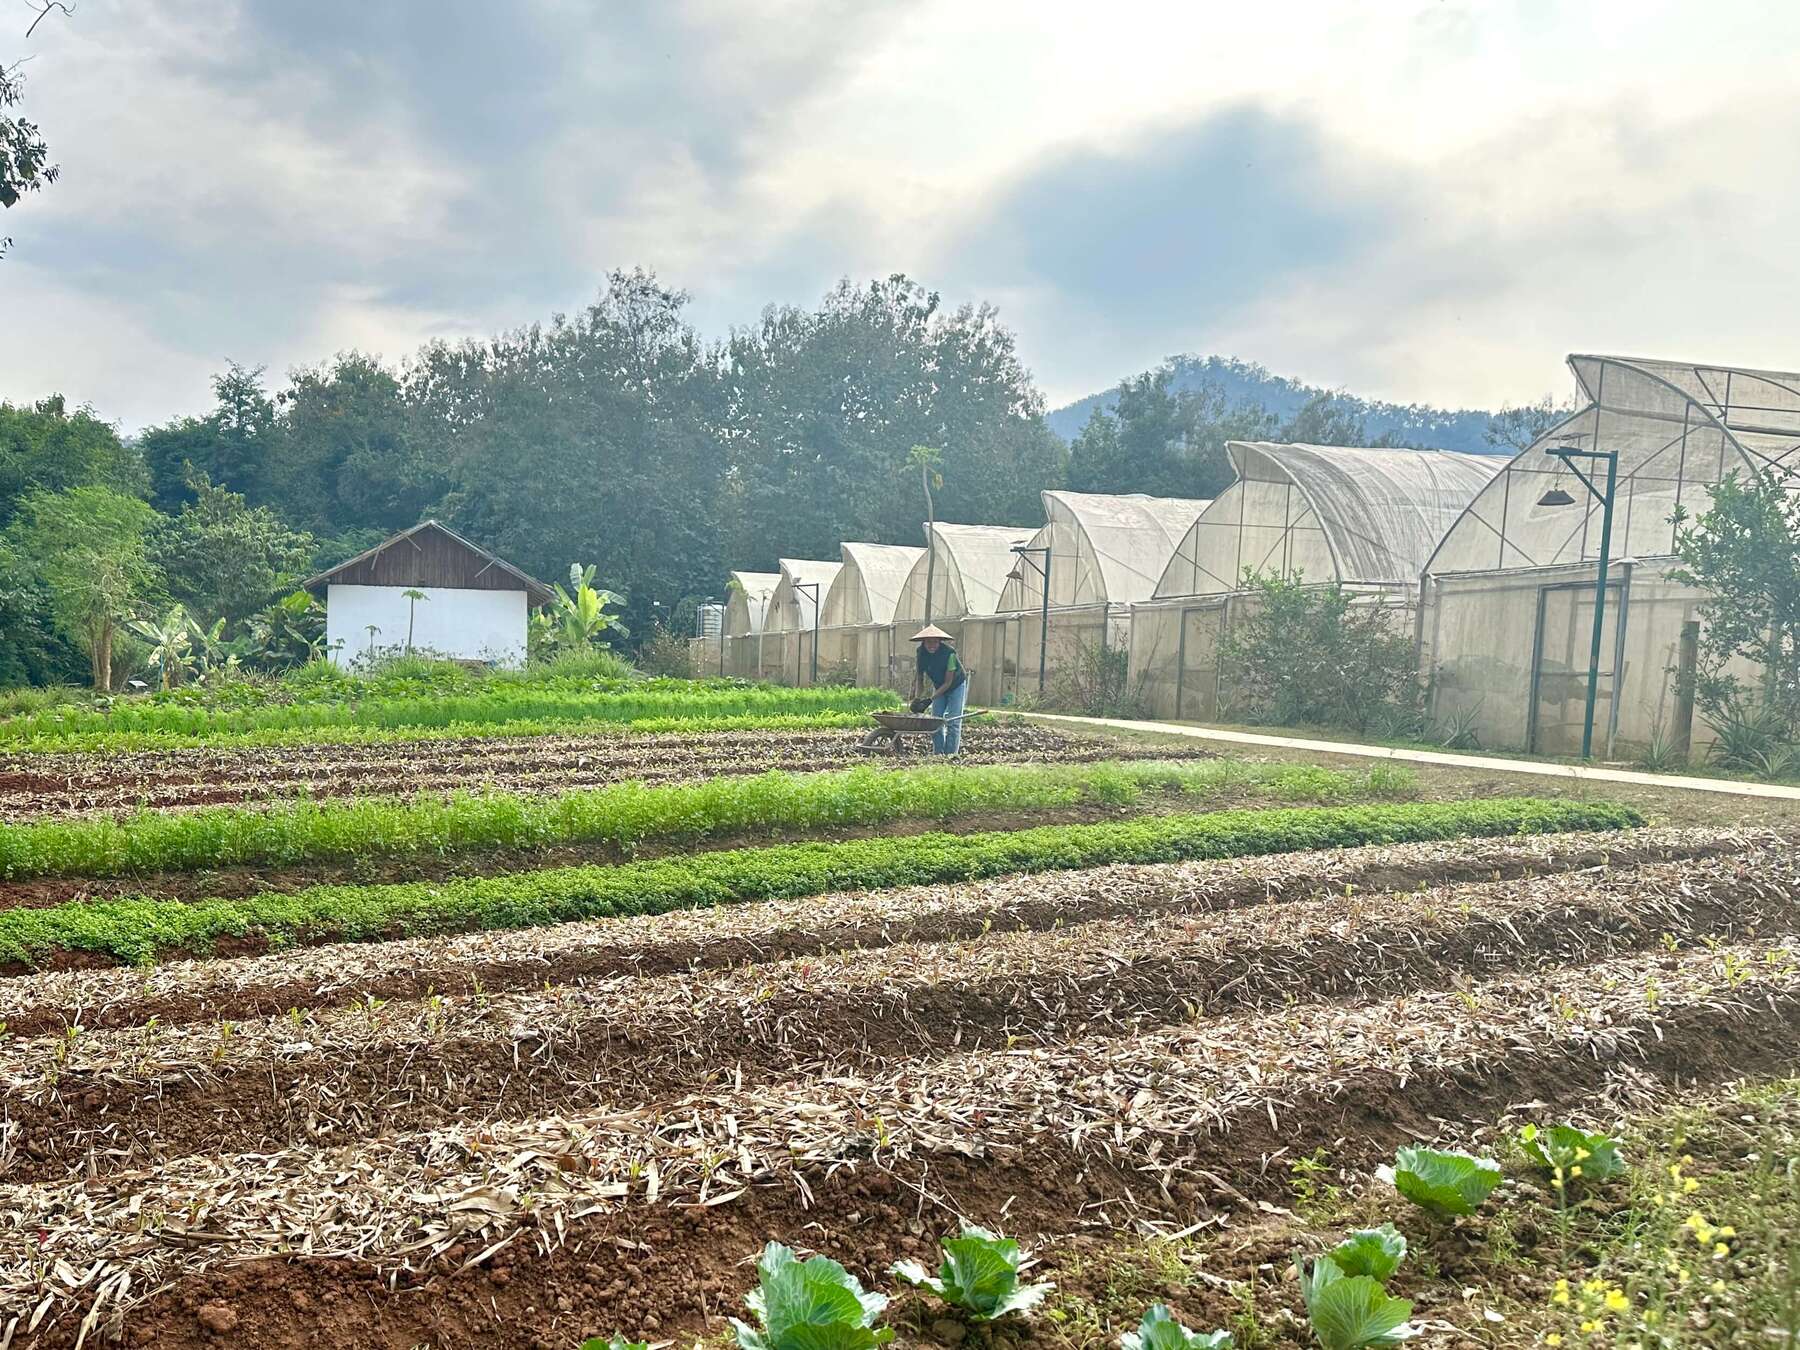 A farmer tending crops in neat rows at the Namkhan Project, Luang Prabang, with greenhouses in the background, under a clear sky.